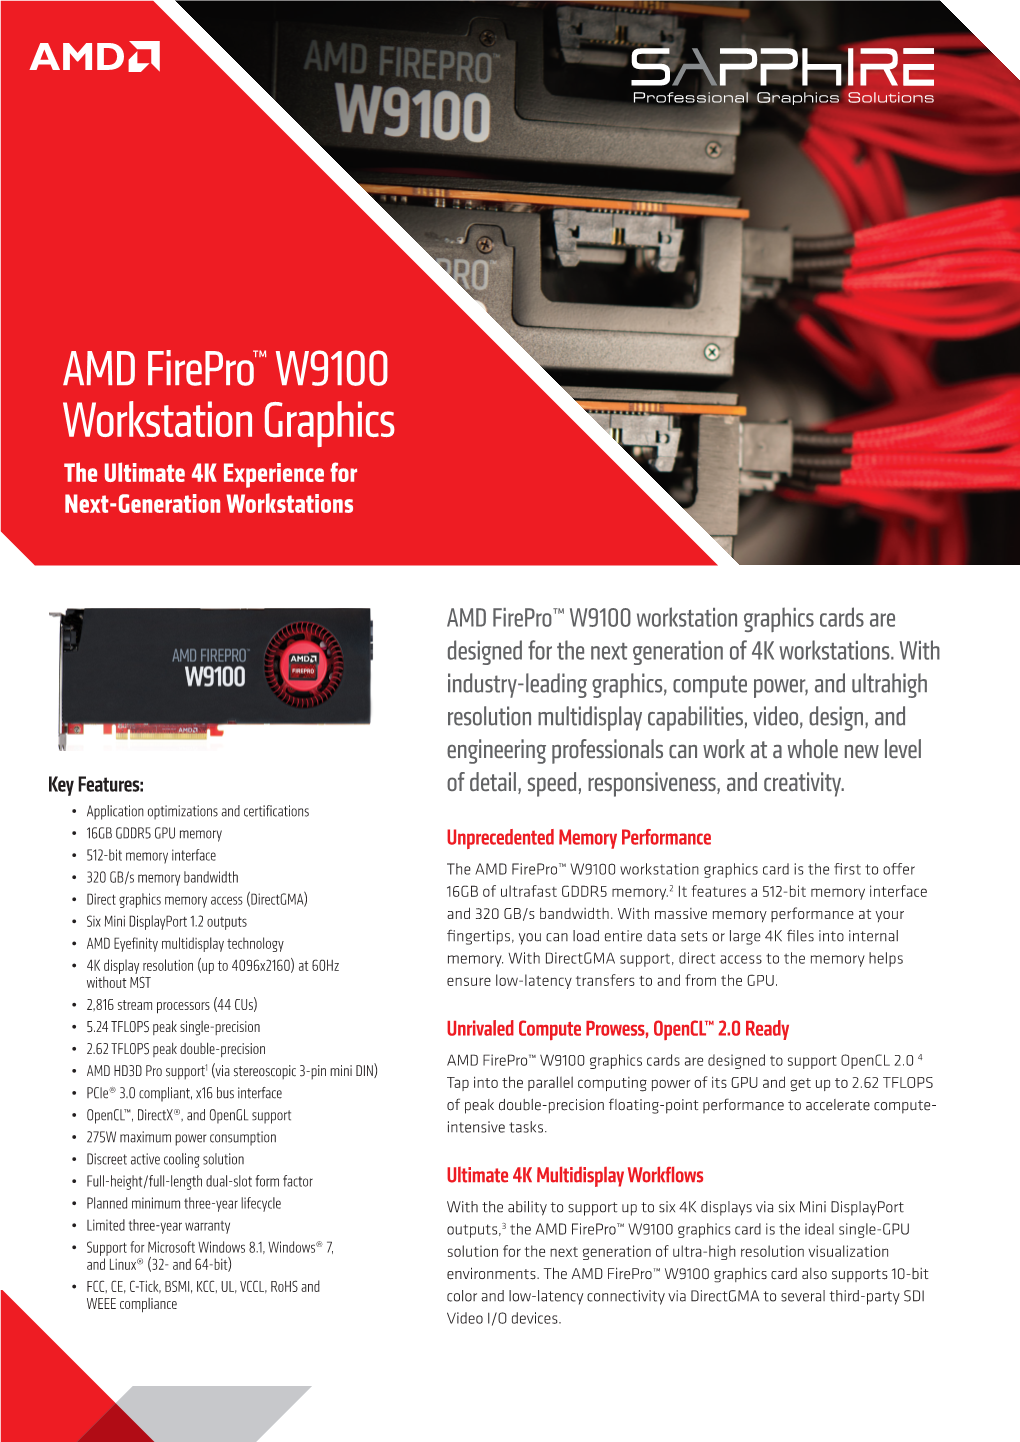 AMD Firepro™ W9100 Workstation Graphics the Ultimate 4K Experience for Next-Generation Workstations